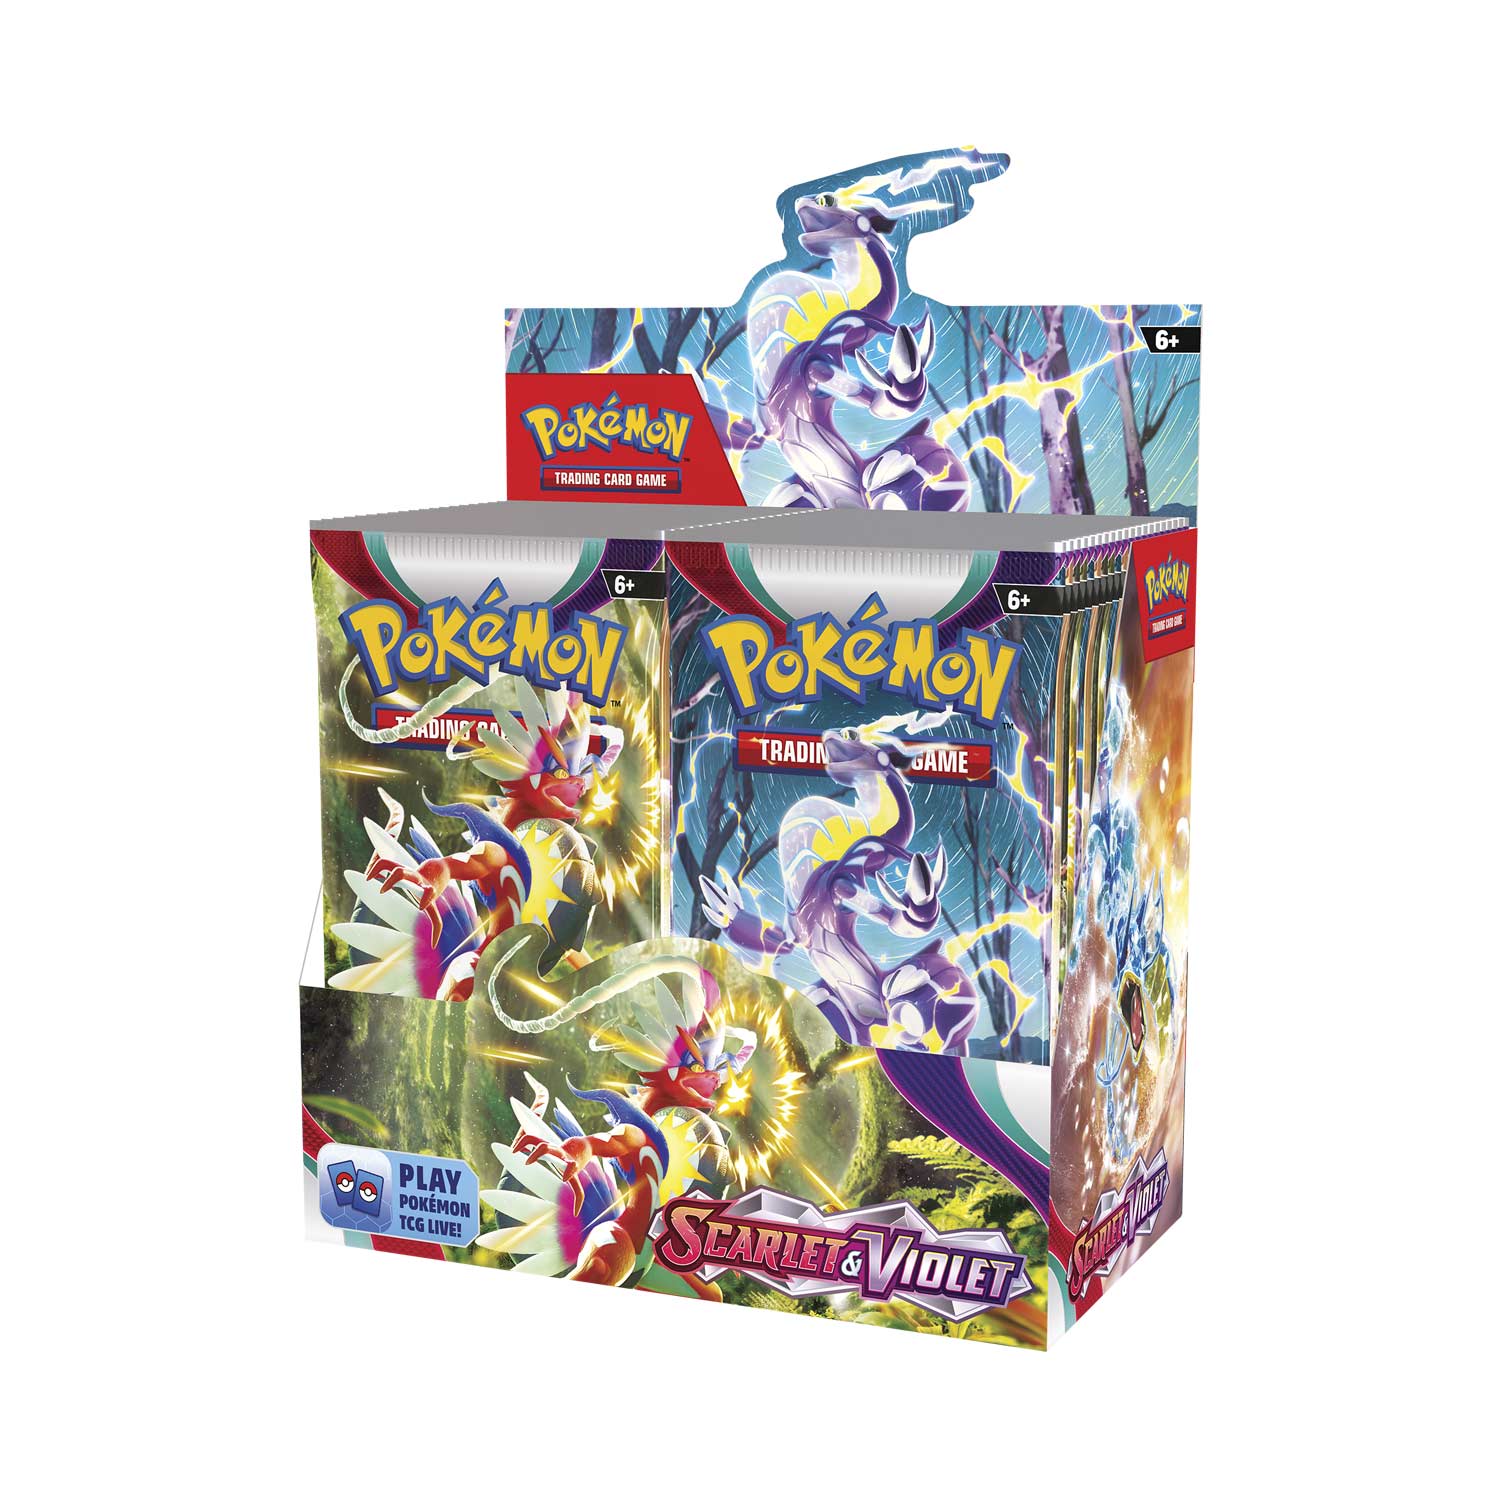 Pokemon Scarlet and Violet Booster box